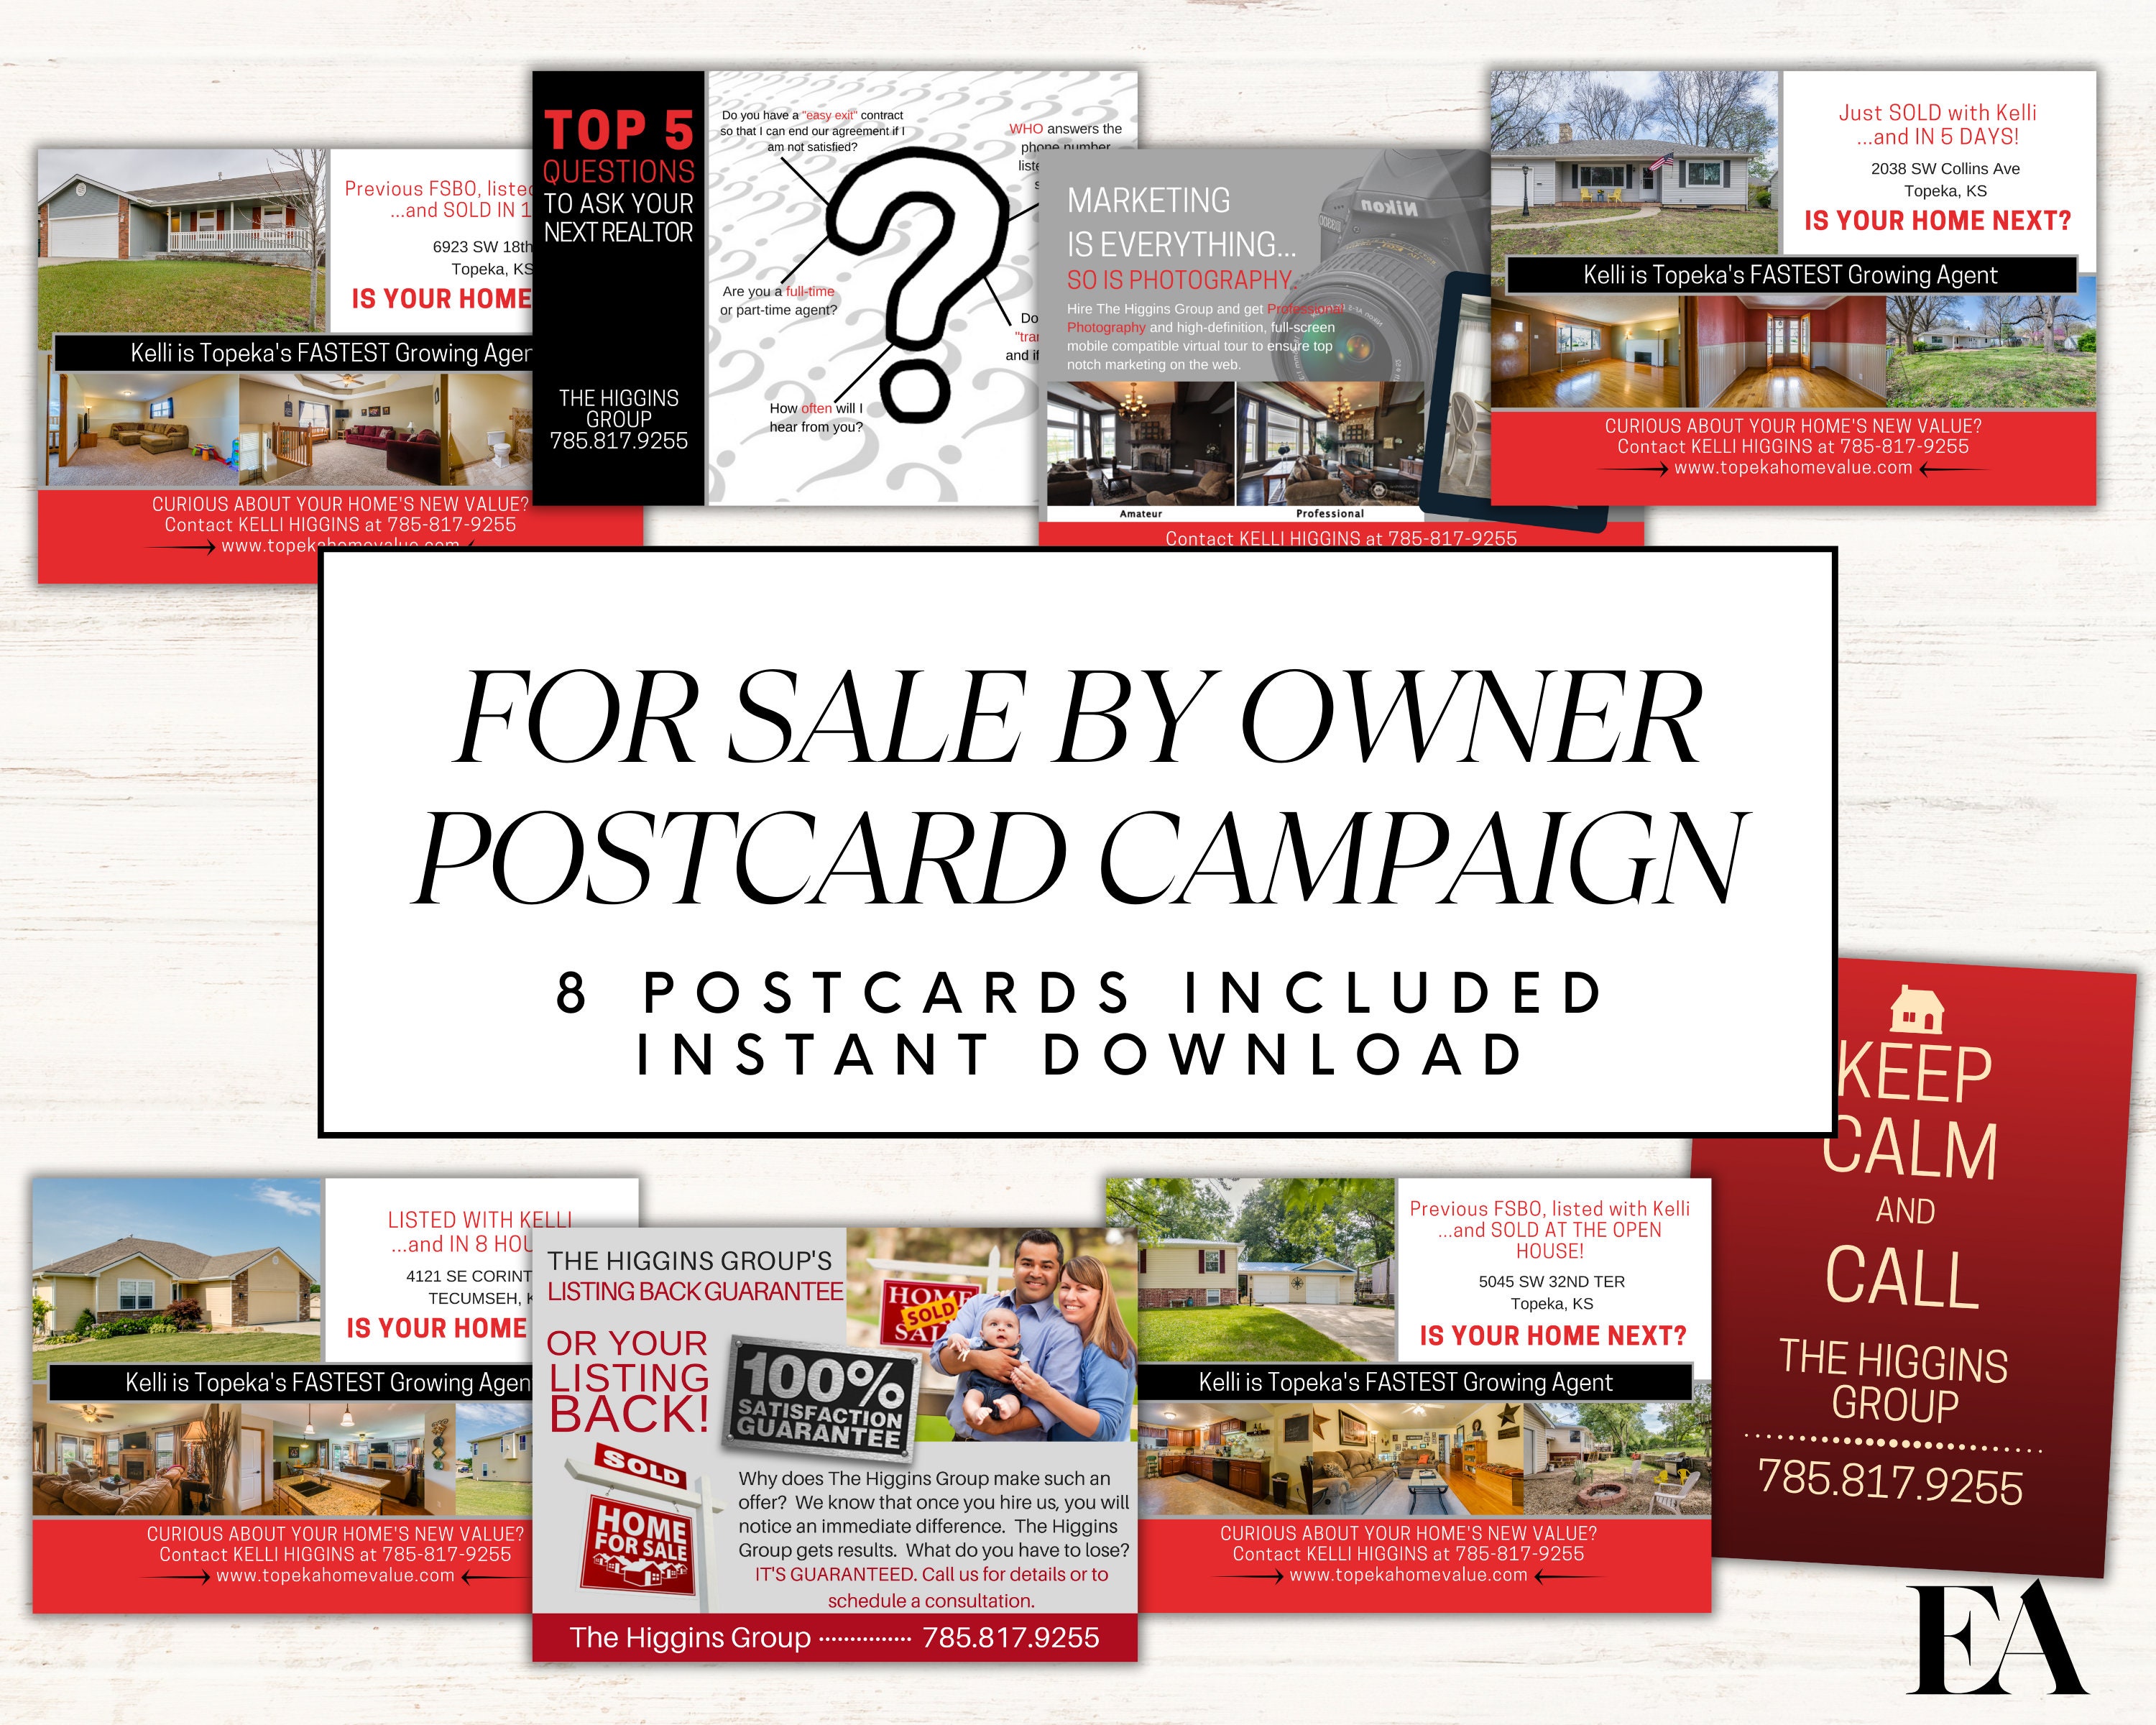 Real Estate FSBO Postcard for Sale by Owner Guide Real Estate image photo pic